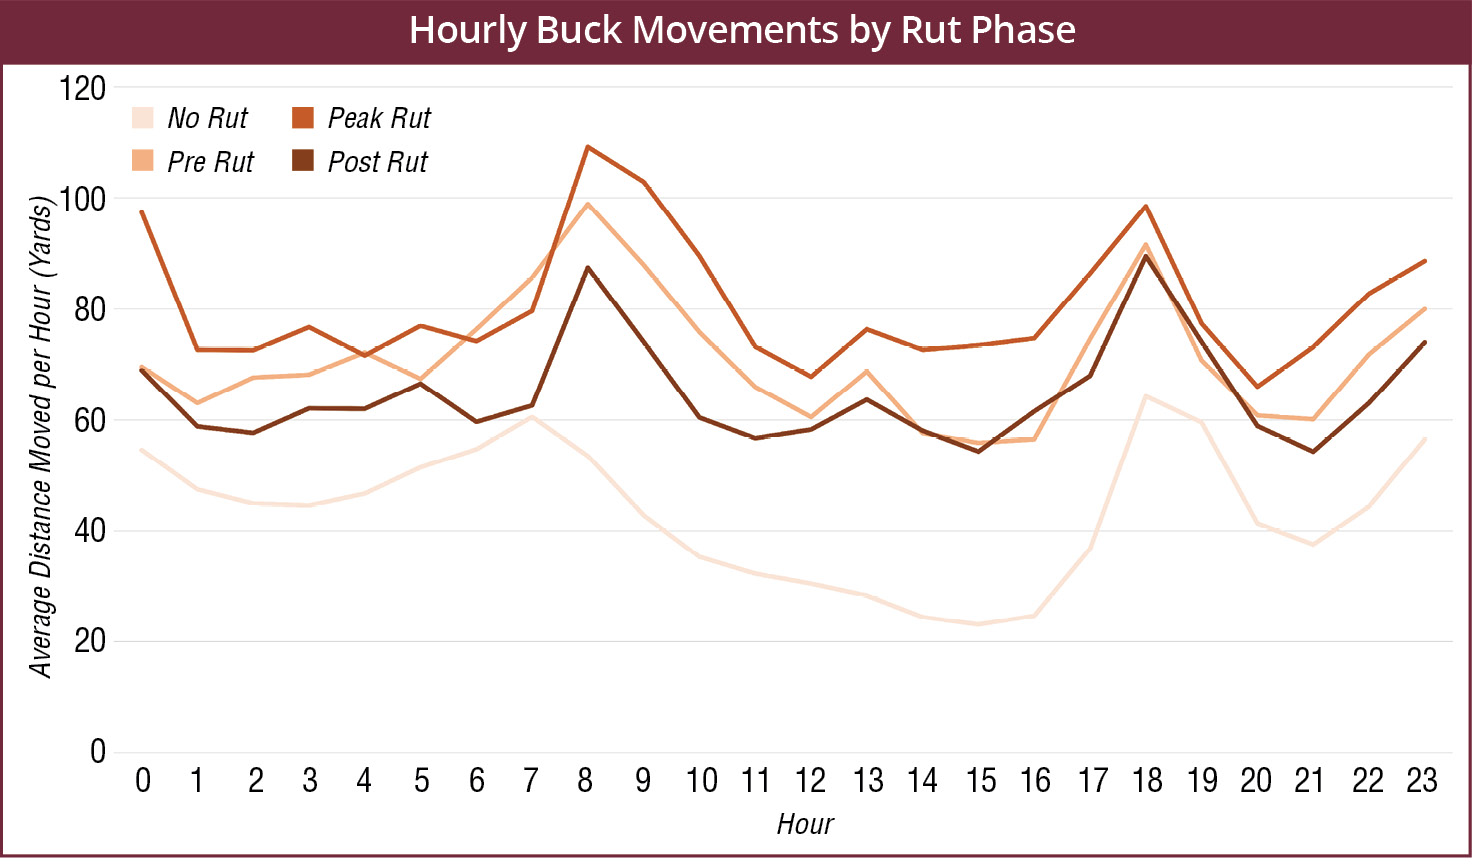 Hourly movement rates by bucks peaks at sunrise and sunset. The phase of the rut also influences these movement rates. At sunrise and sunset, movement is greatest during the peak of the rut. 